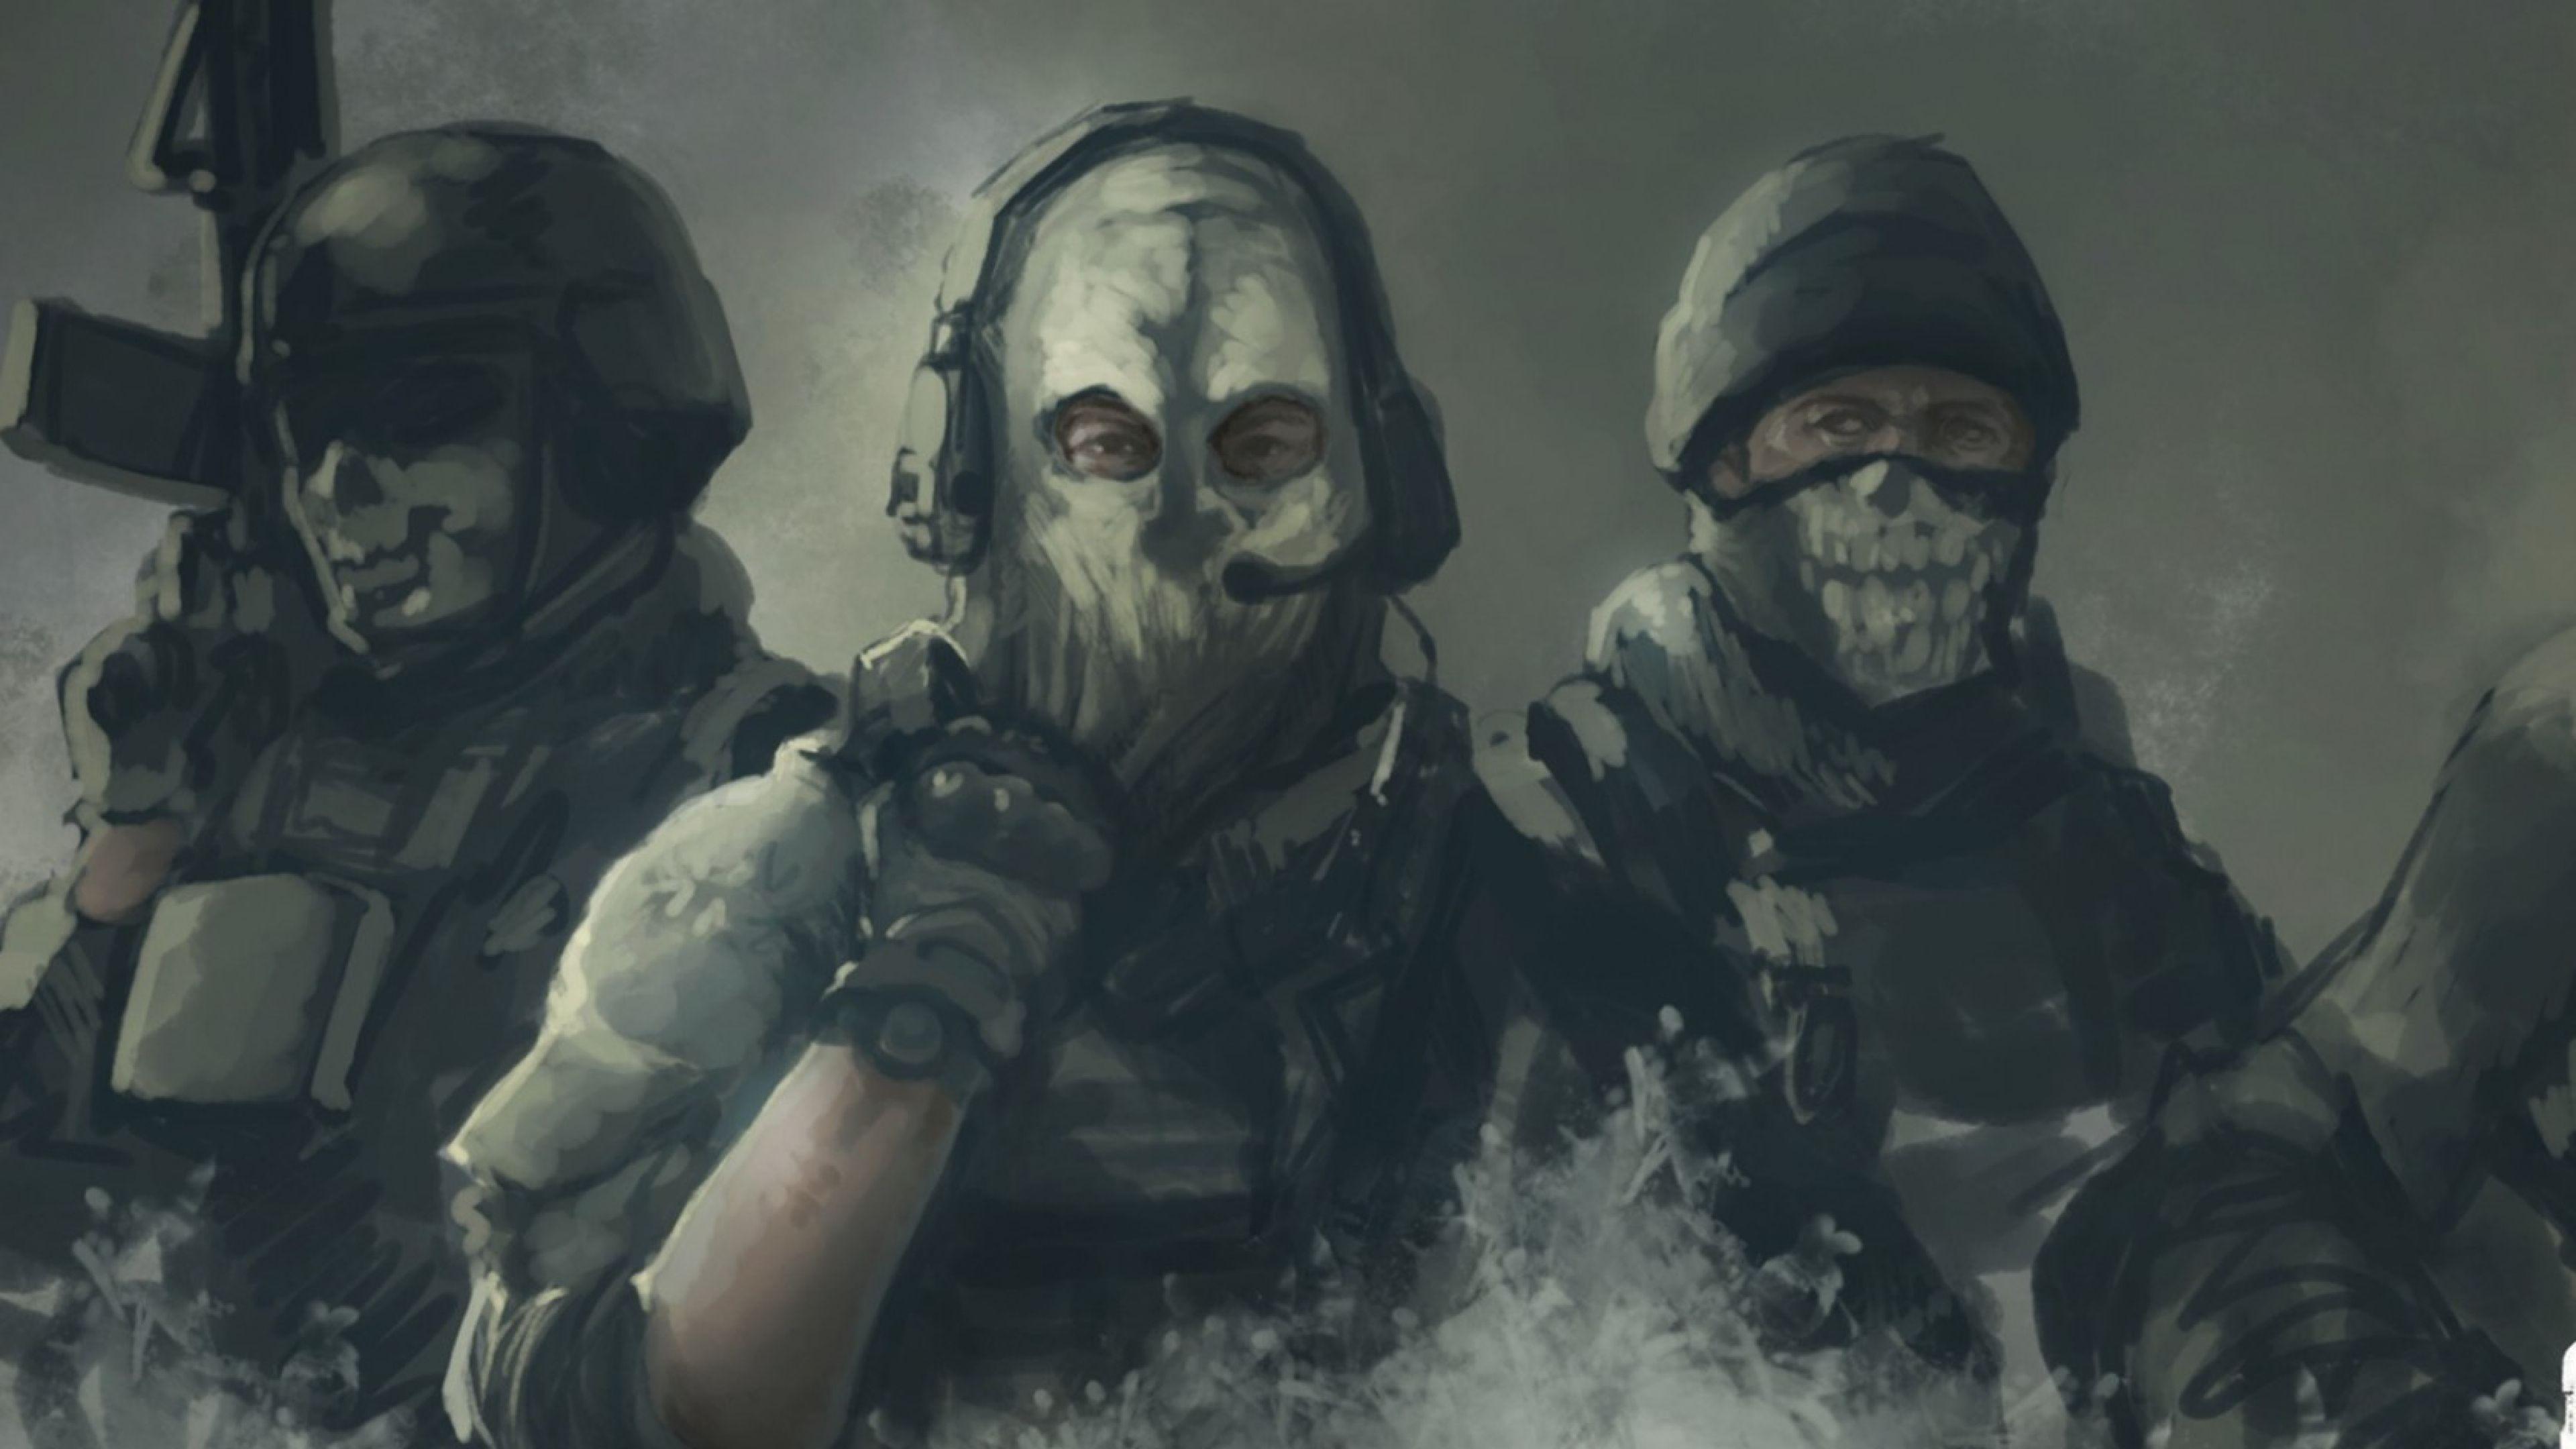 Download Wallpapers 3840x2160 Call of duty, Ghosts, Art 4K Ultra HD